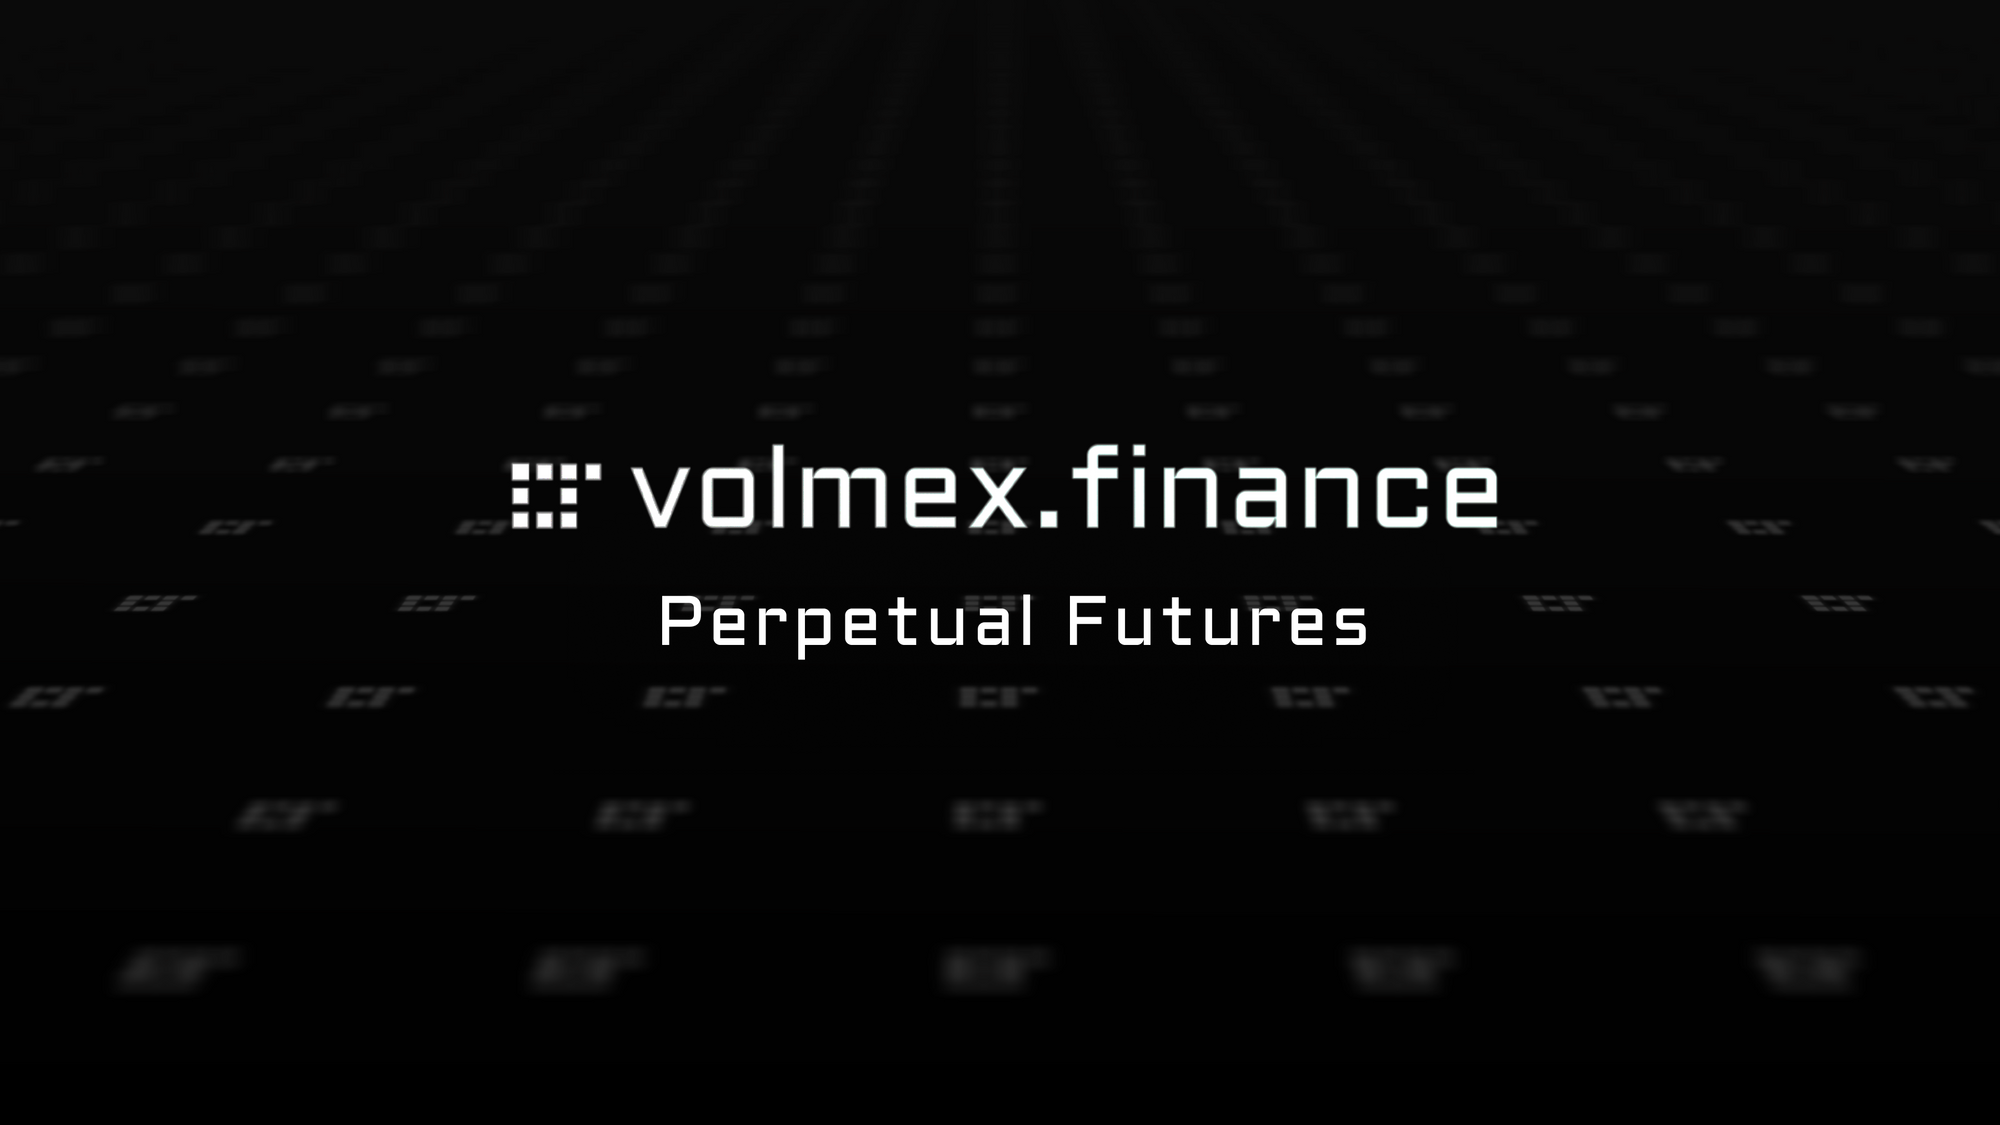 Volmex Perpetual Futures Testnet Trading Competition Winners